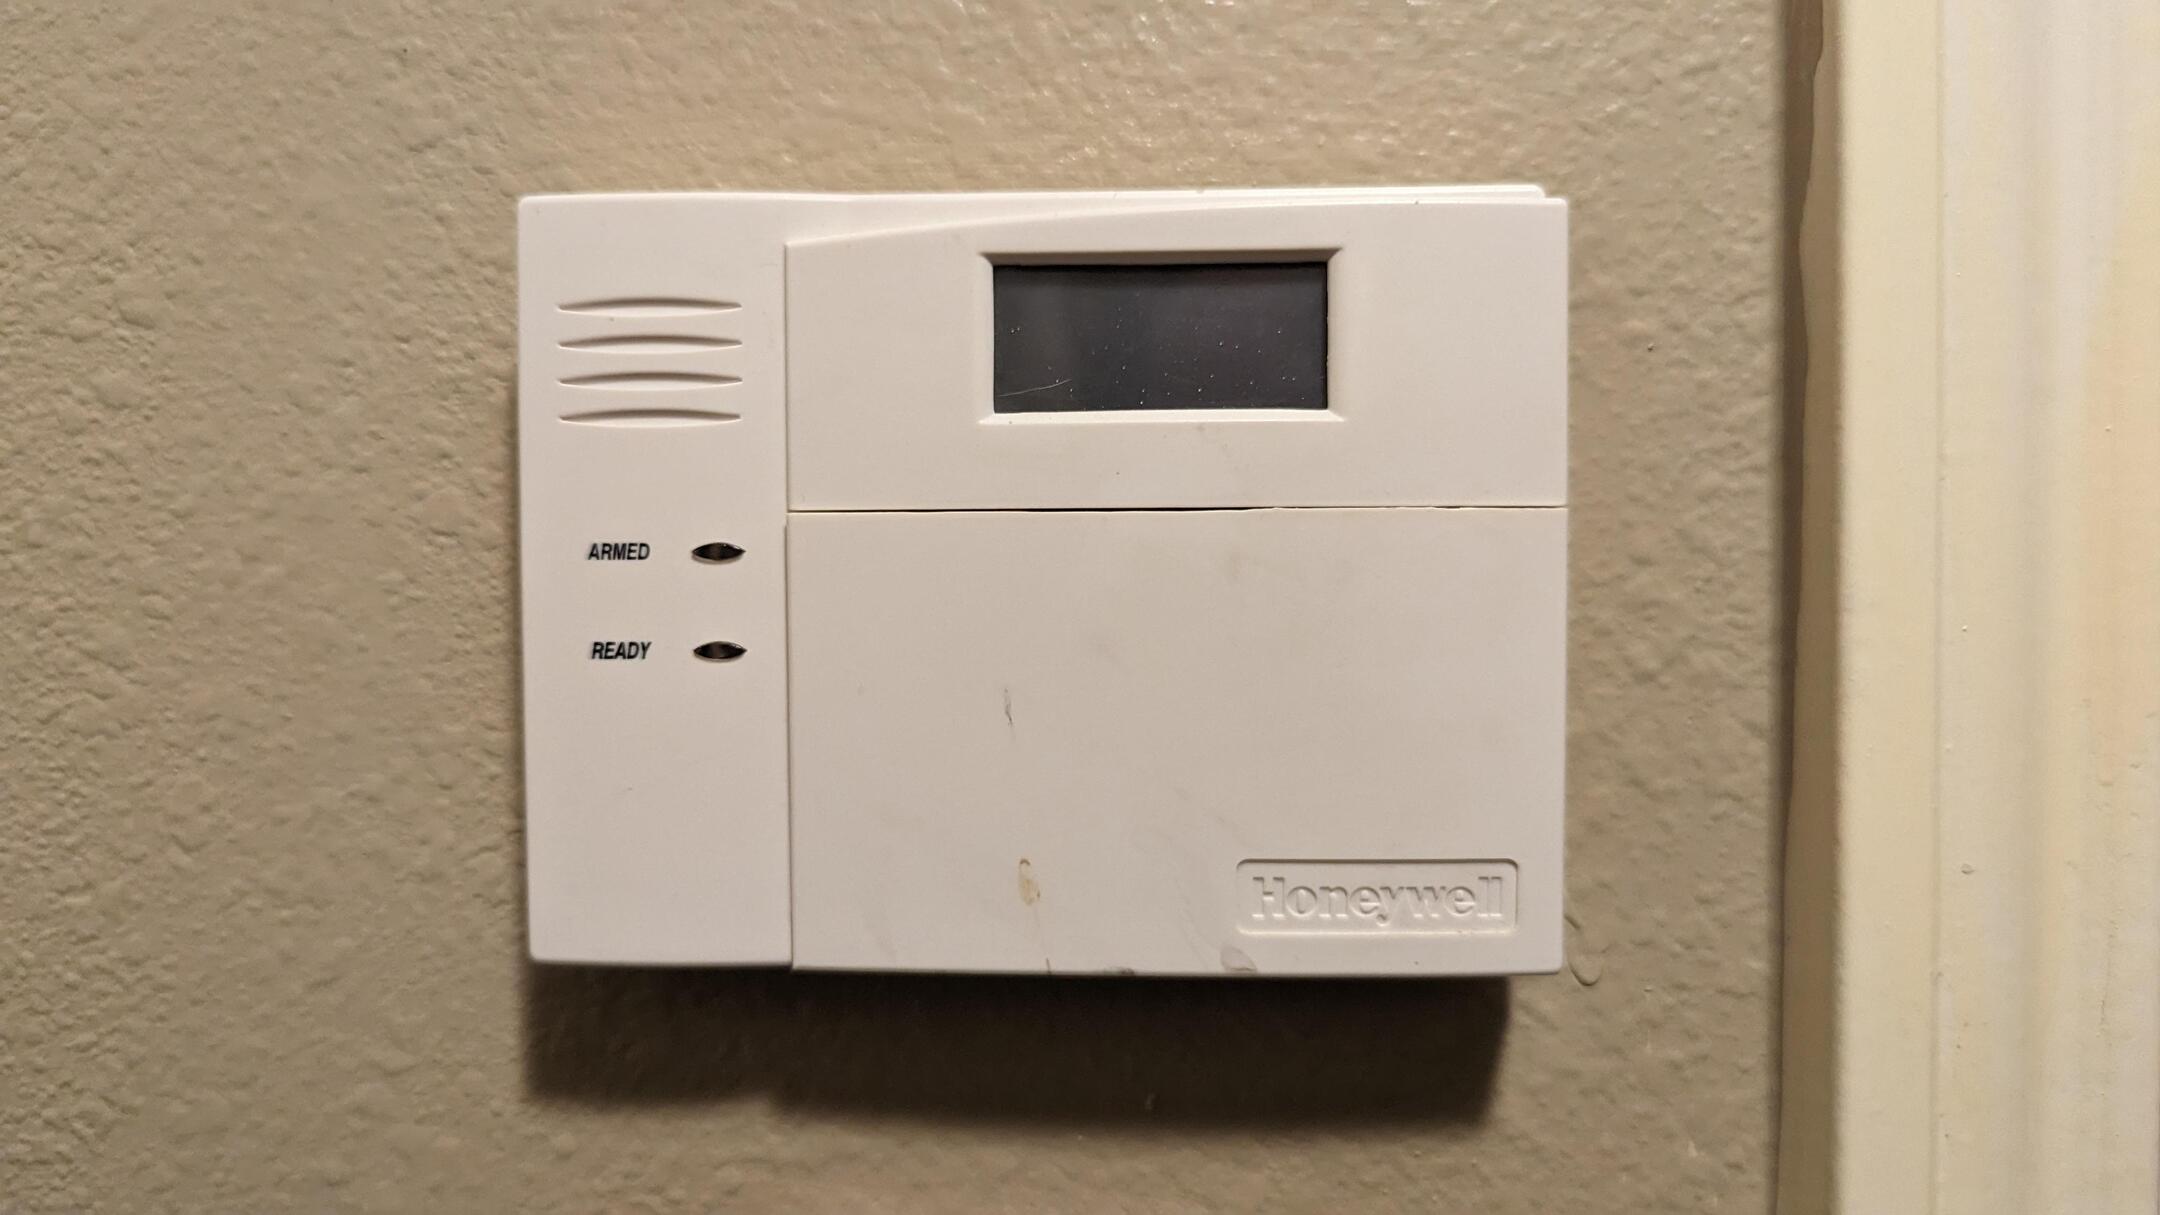 How To Turn Off Older Alarm Systems